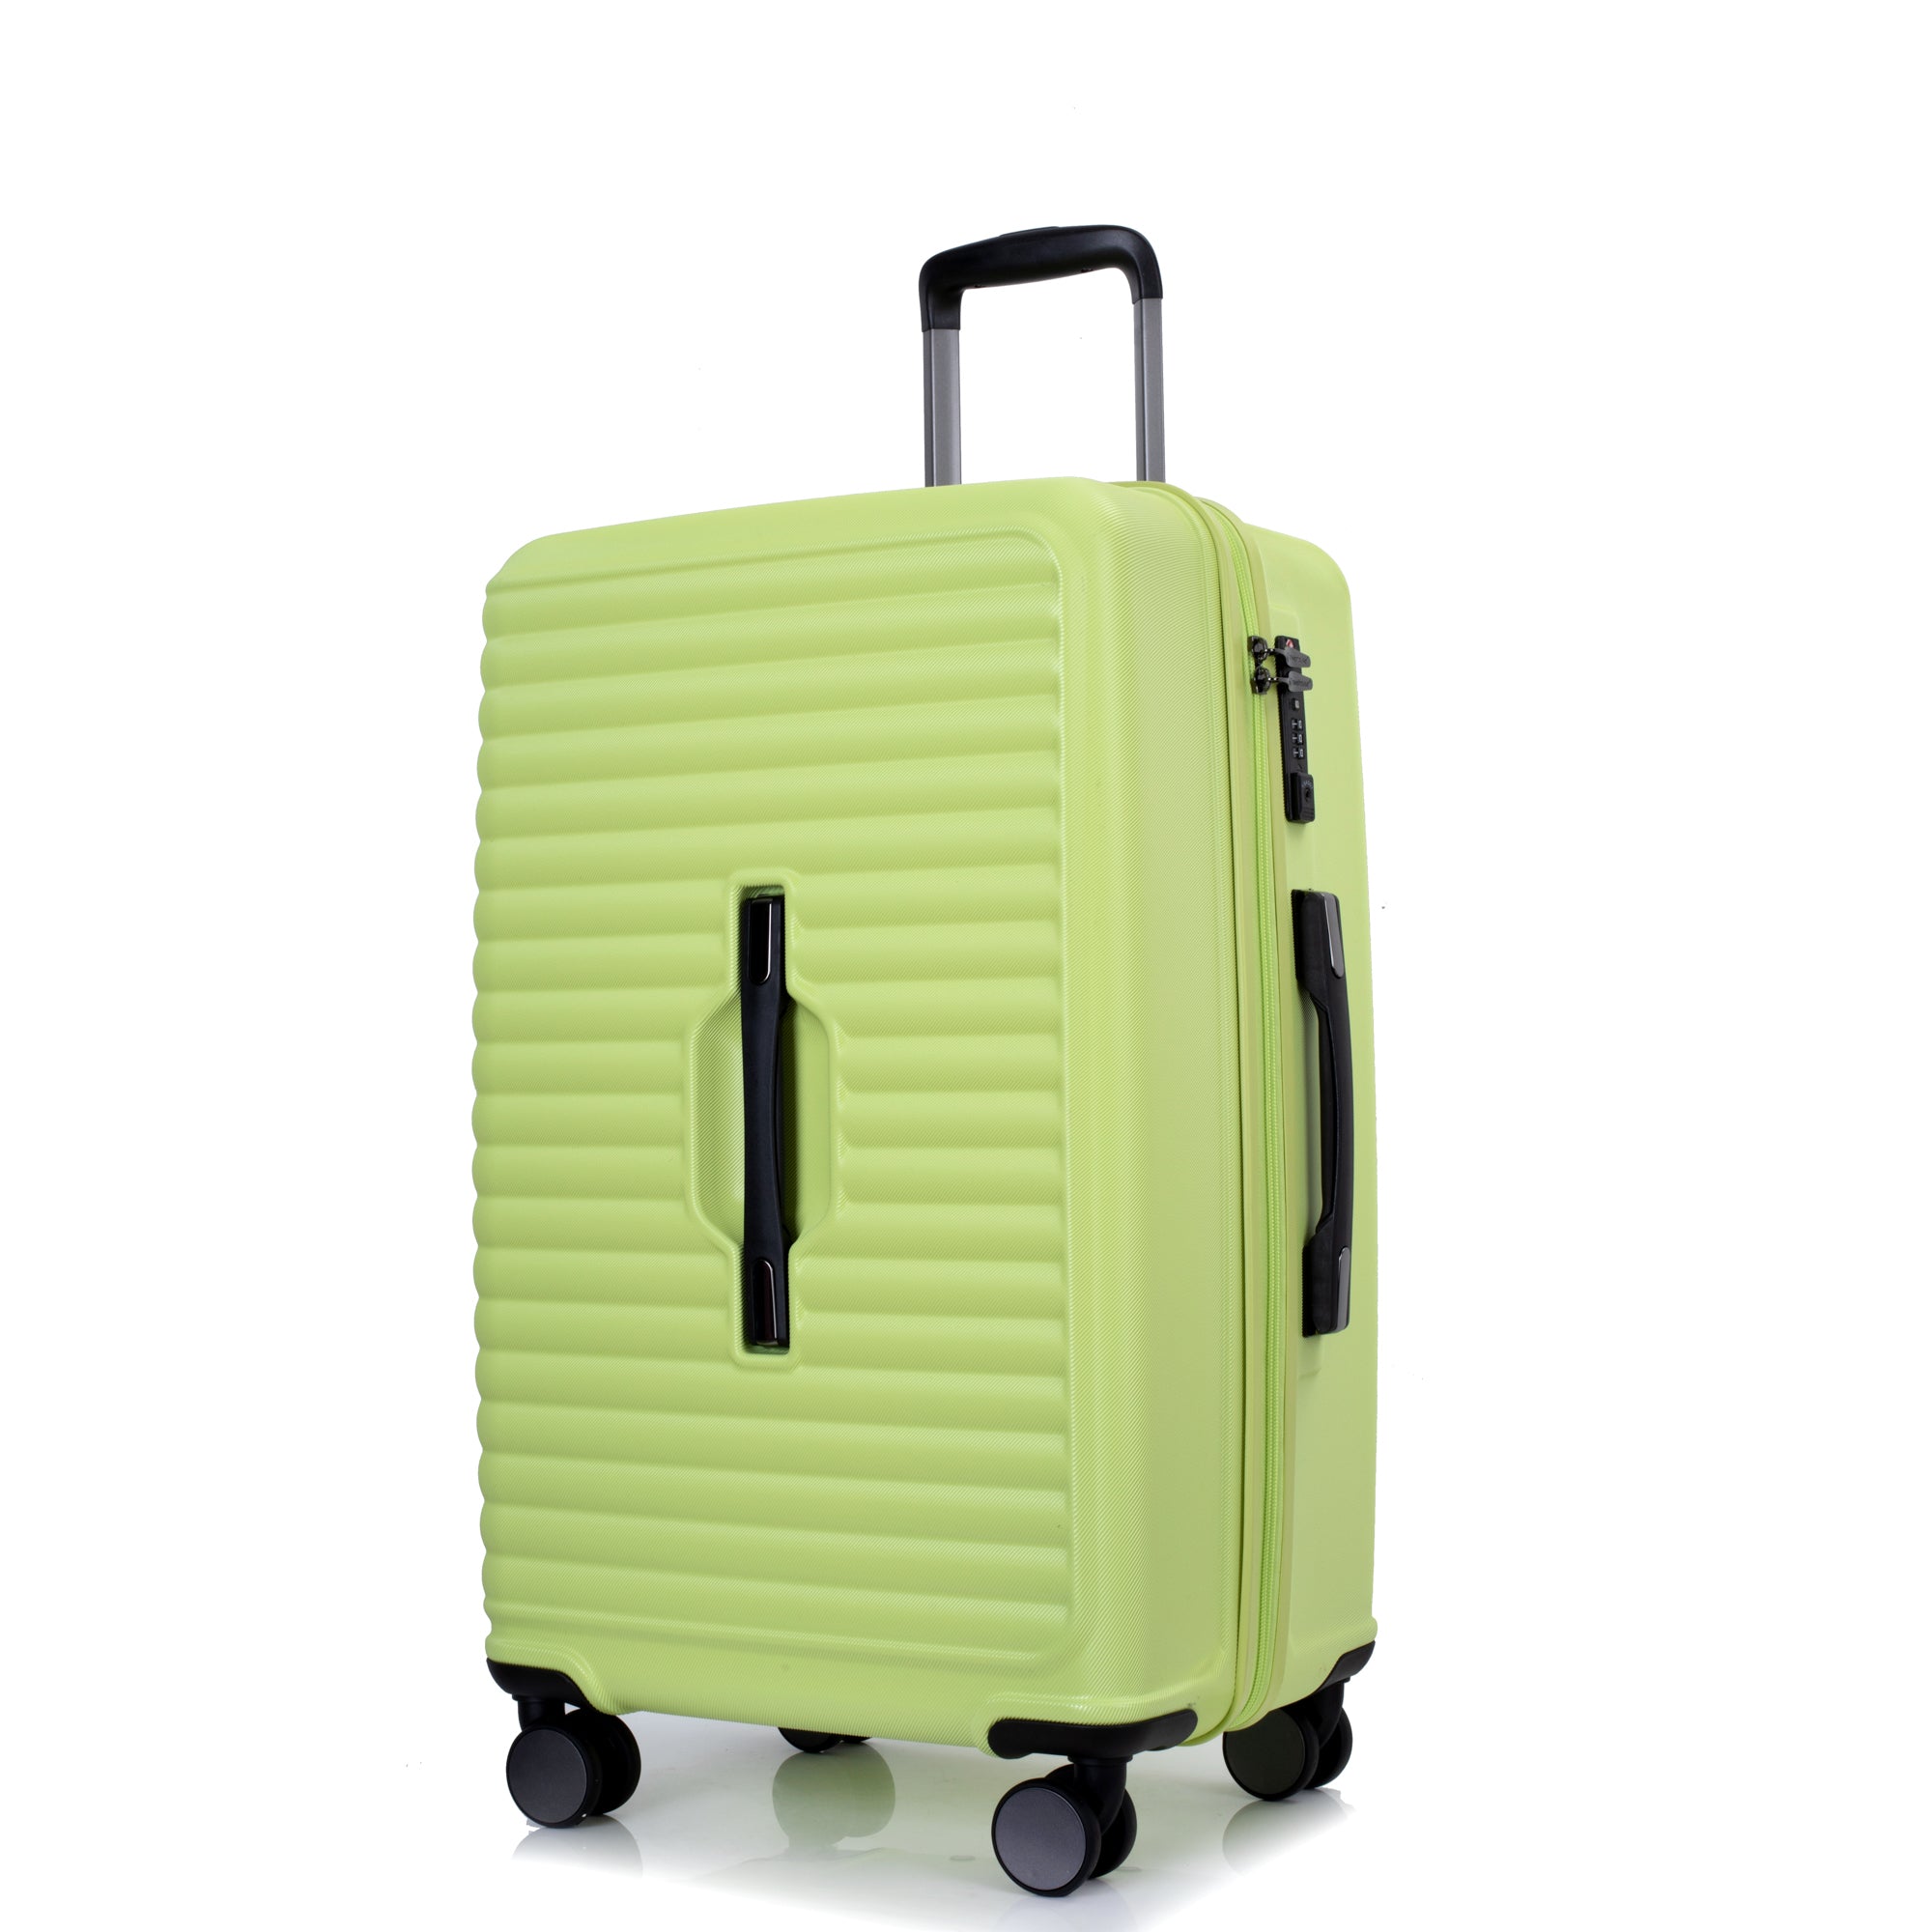 3 Piece Luggage Sets PC ABS Lightweight Suitcase with light green-abs+pc